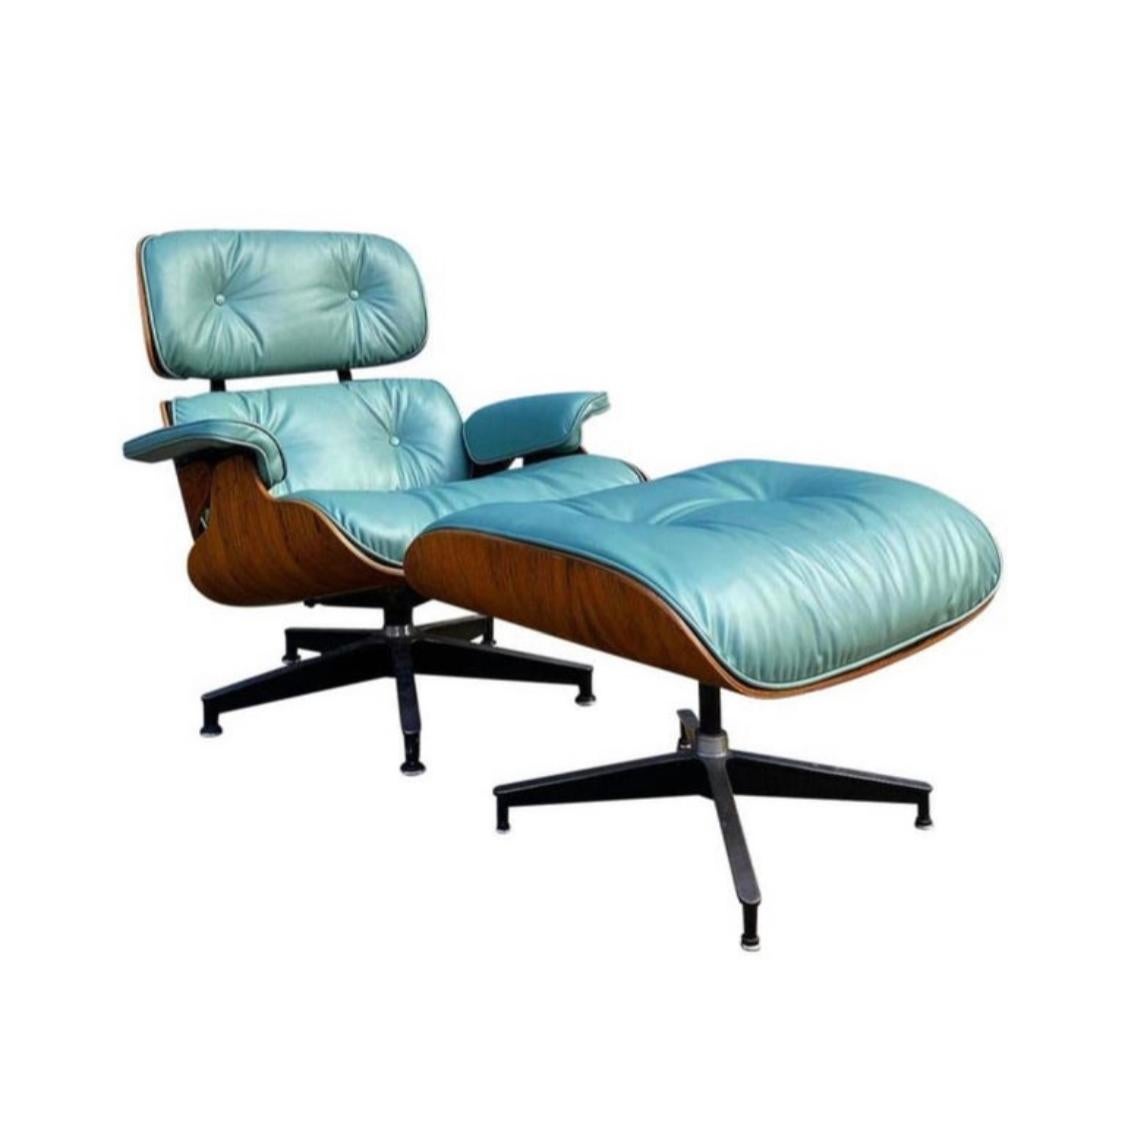 Incredibly vibrant and elegant edition of the classic Herman Miller Eames lounge chair and ottoman, circa 1960s-70s chair with original Herman Miller label. Custom leather cushions in superb condition. This shade is not a color we have ever come